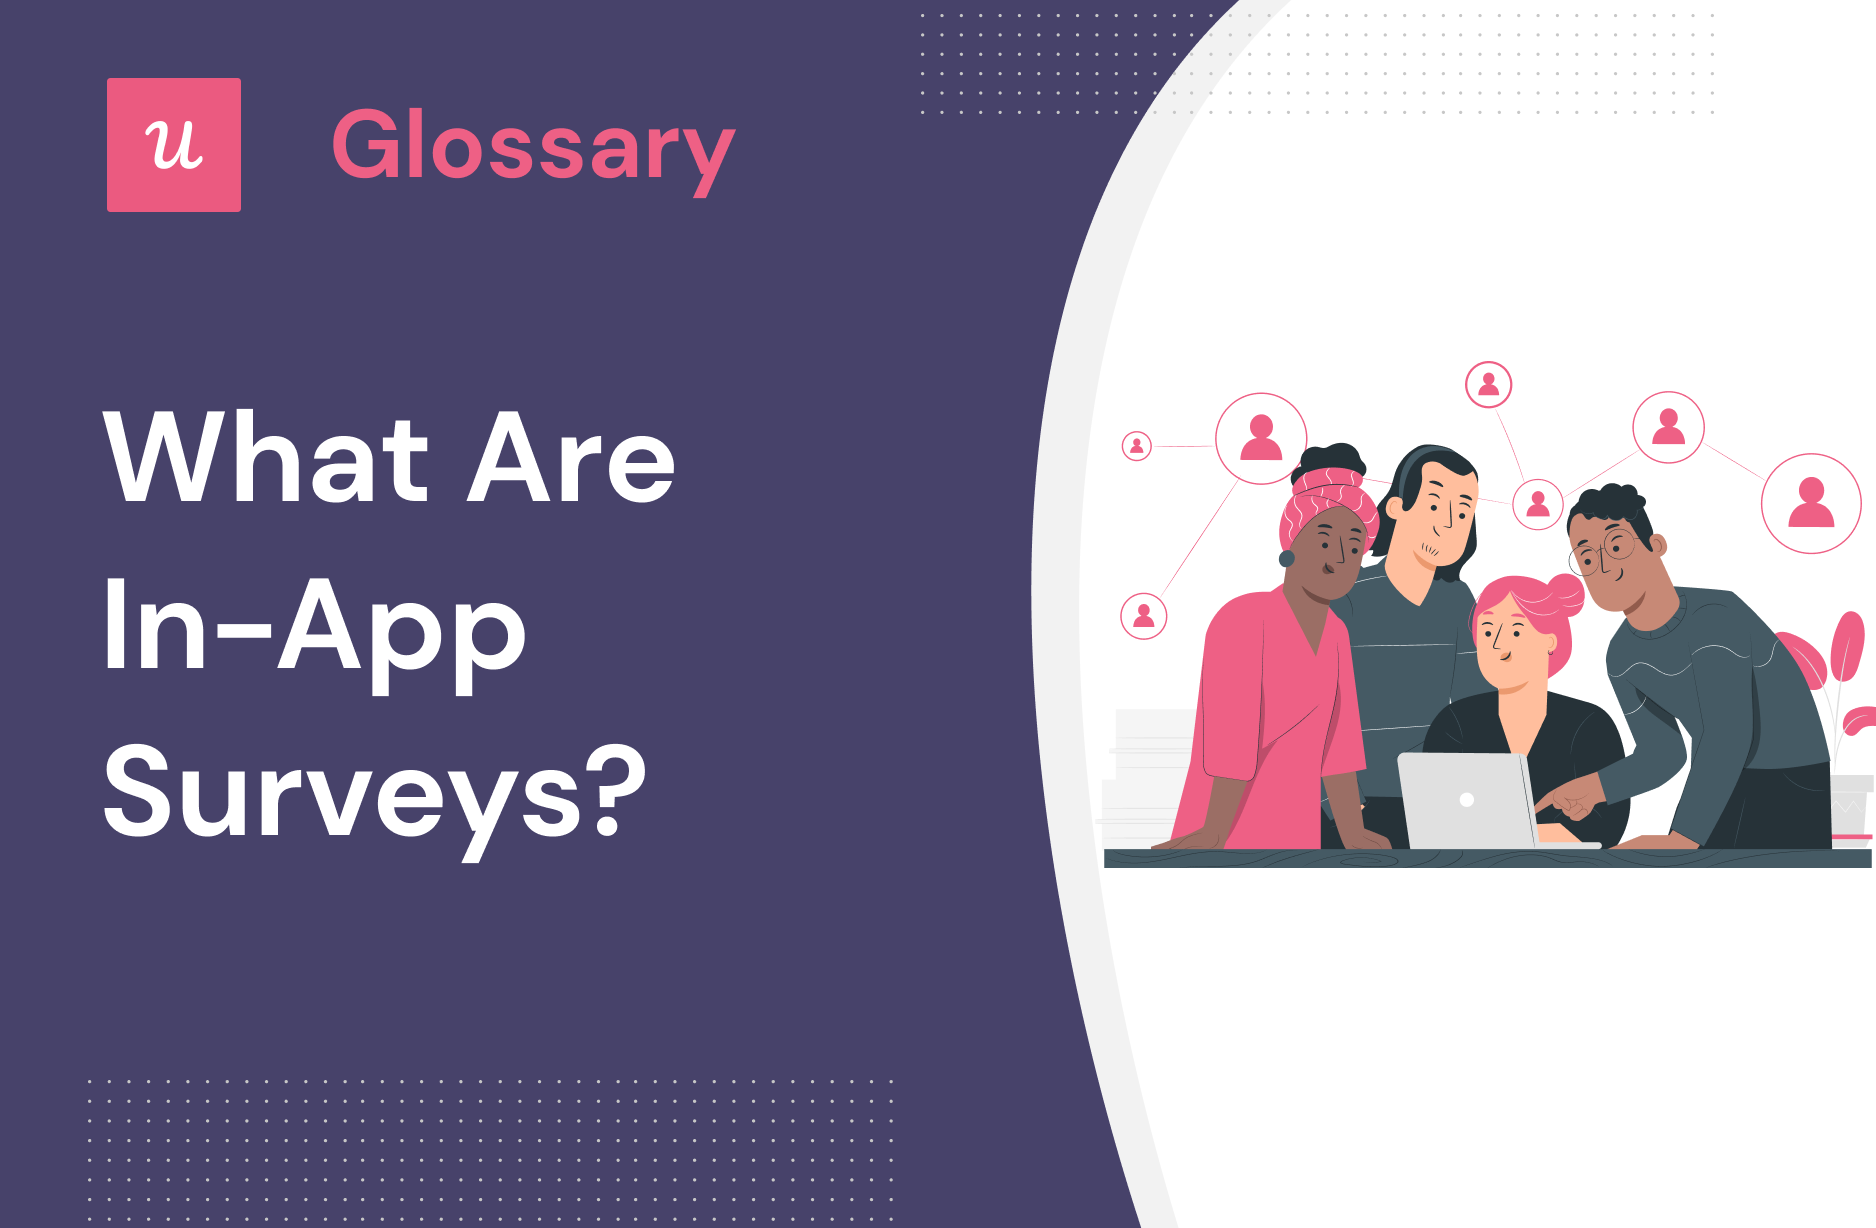 What are In-App Surveys?